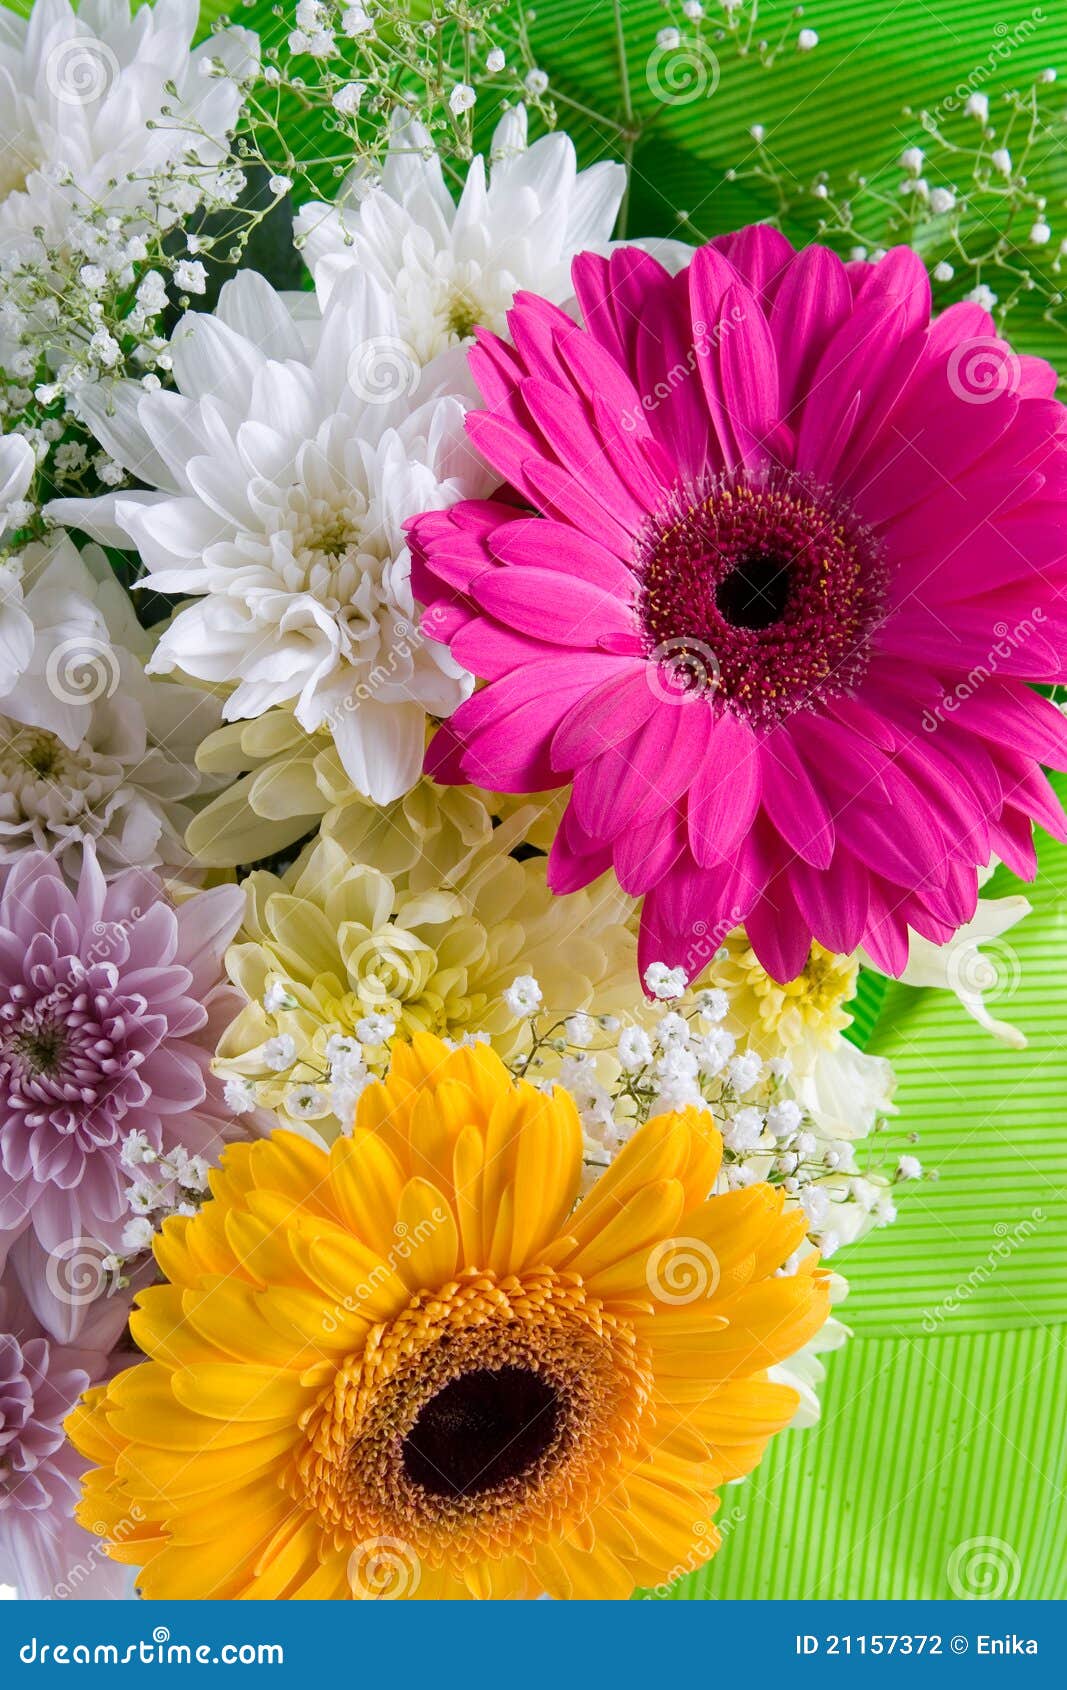 Bouquet of Beautiful Flowers Stock Photo - Image of nature, flower